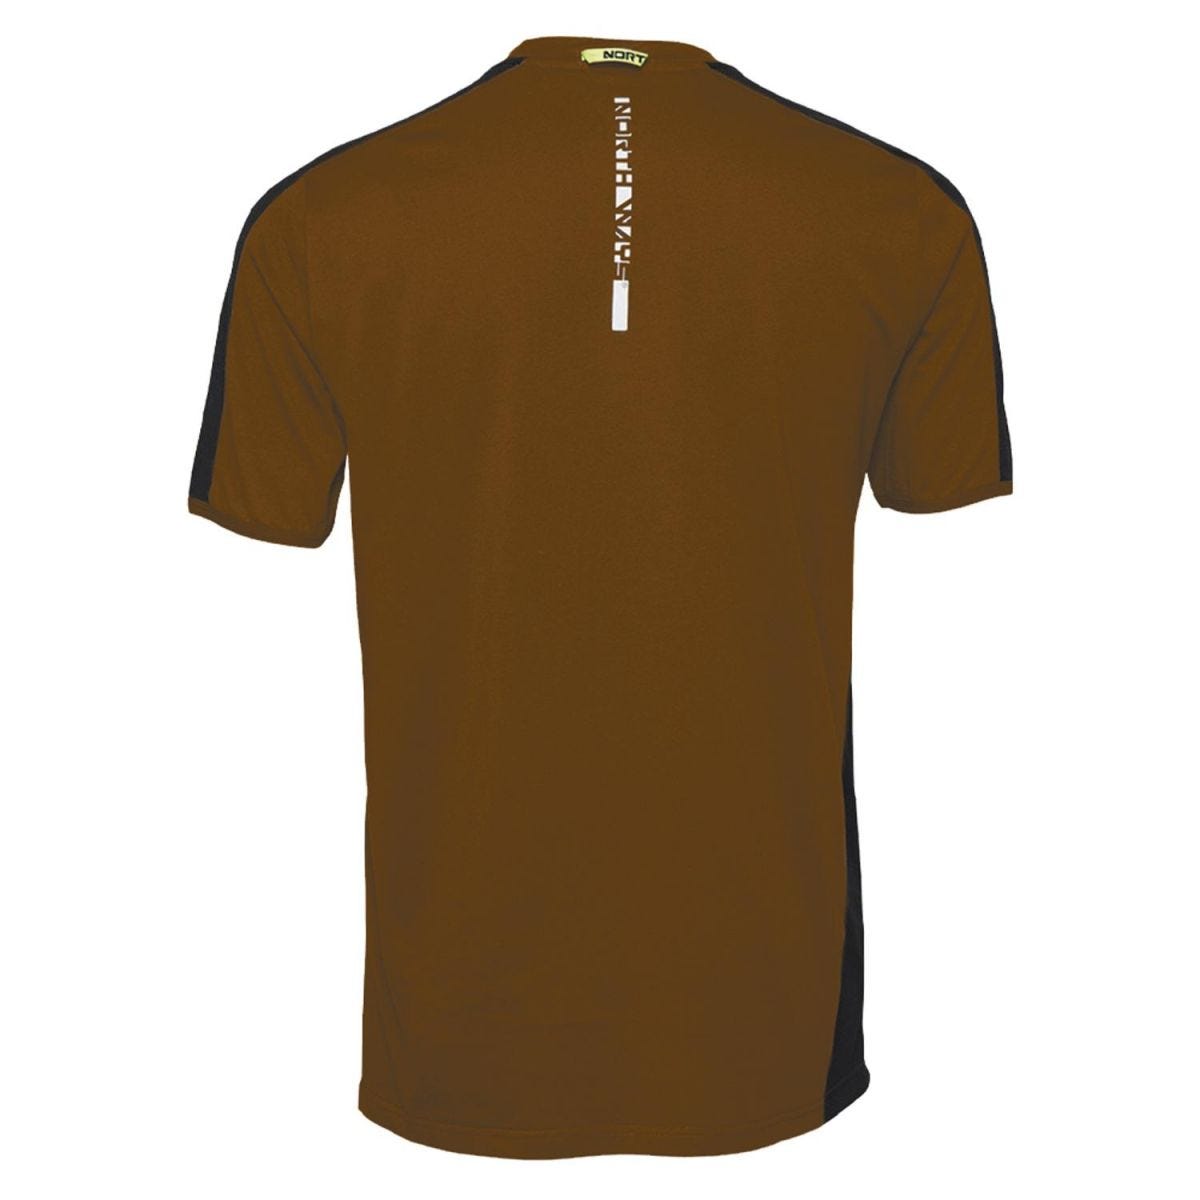 Tee-shirt à manches courtes pour homme Andy camel - North Ways - Taille S 1